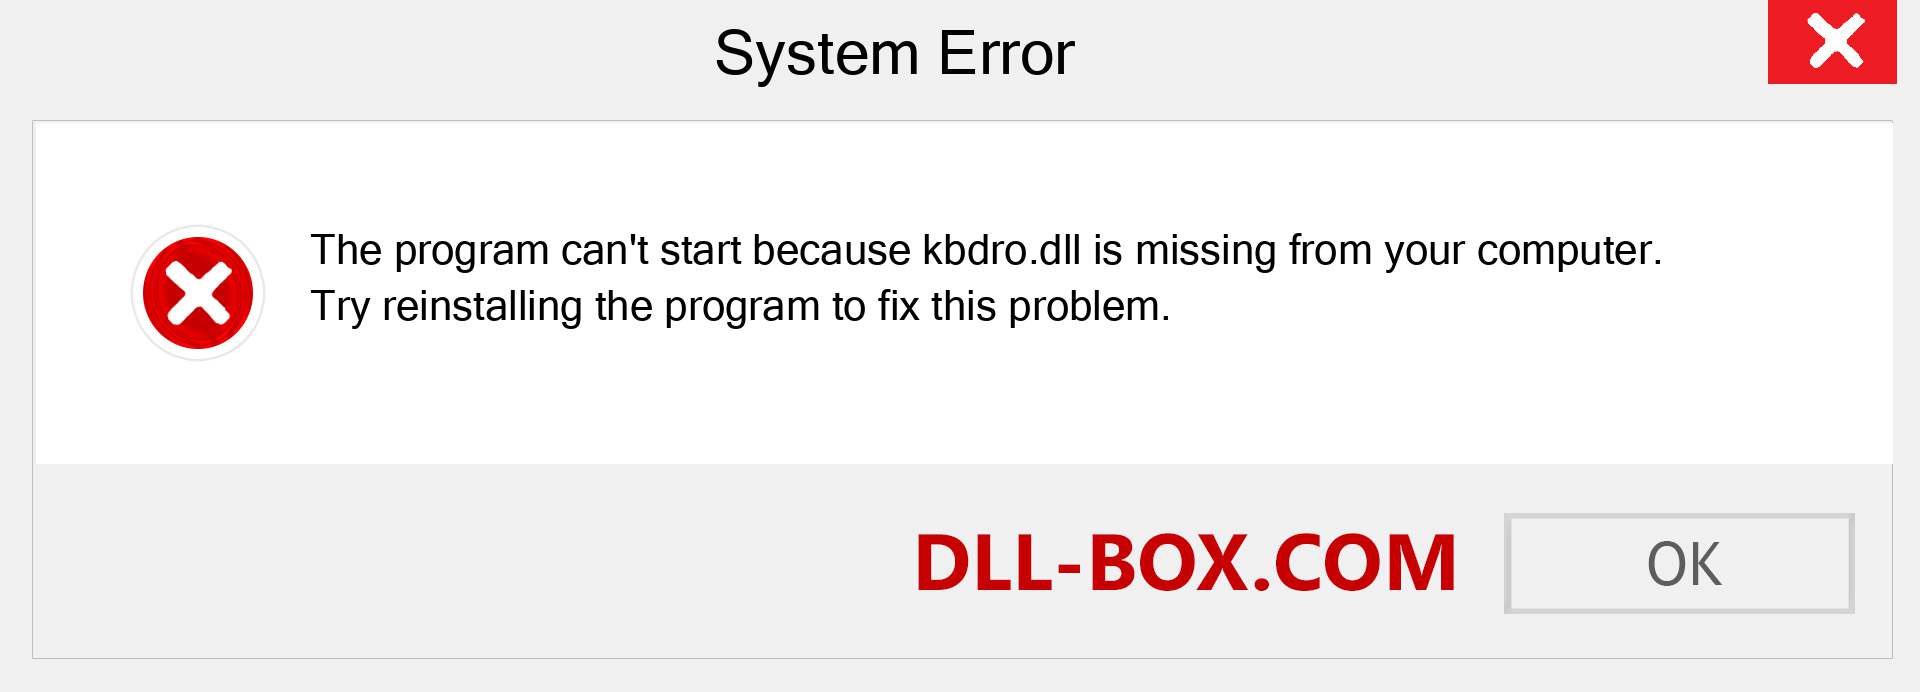  kbdro.dll file is missing?. Download for Windows 7, 8, 10 - Fix  kbdro dll Missing Error on Windows, photos, images